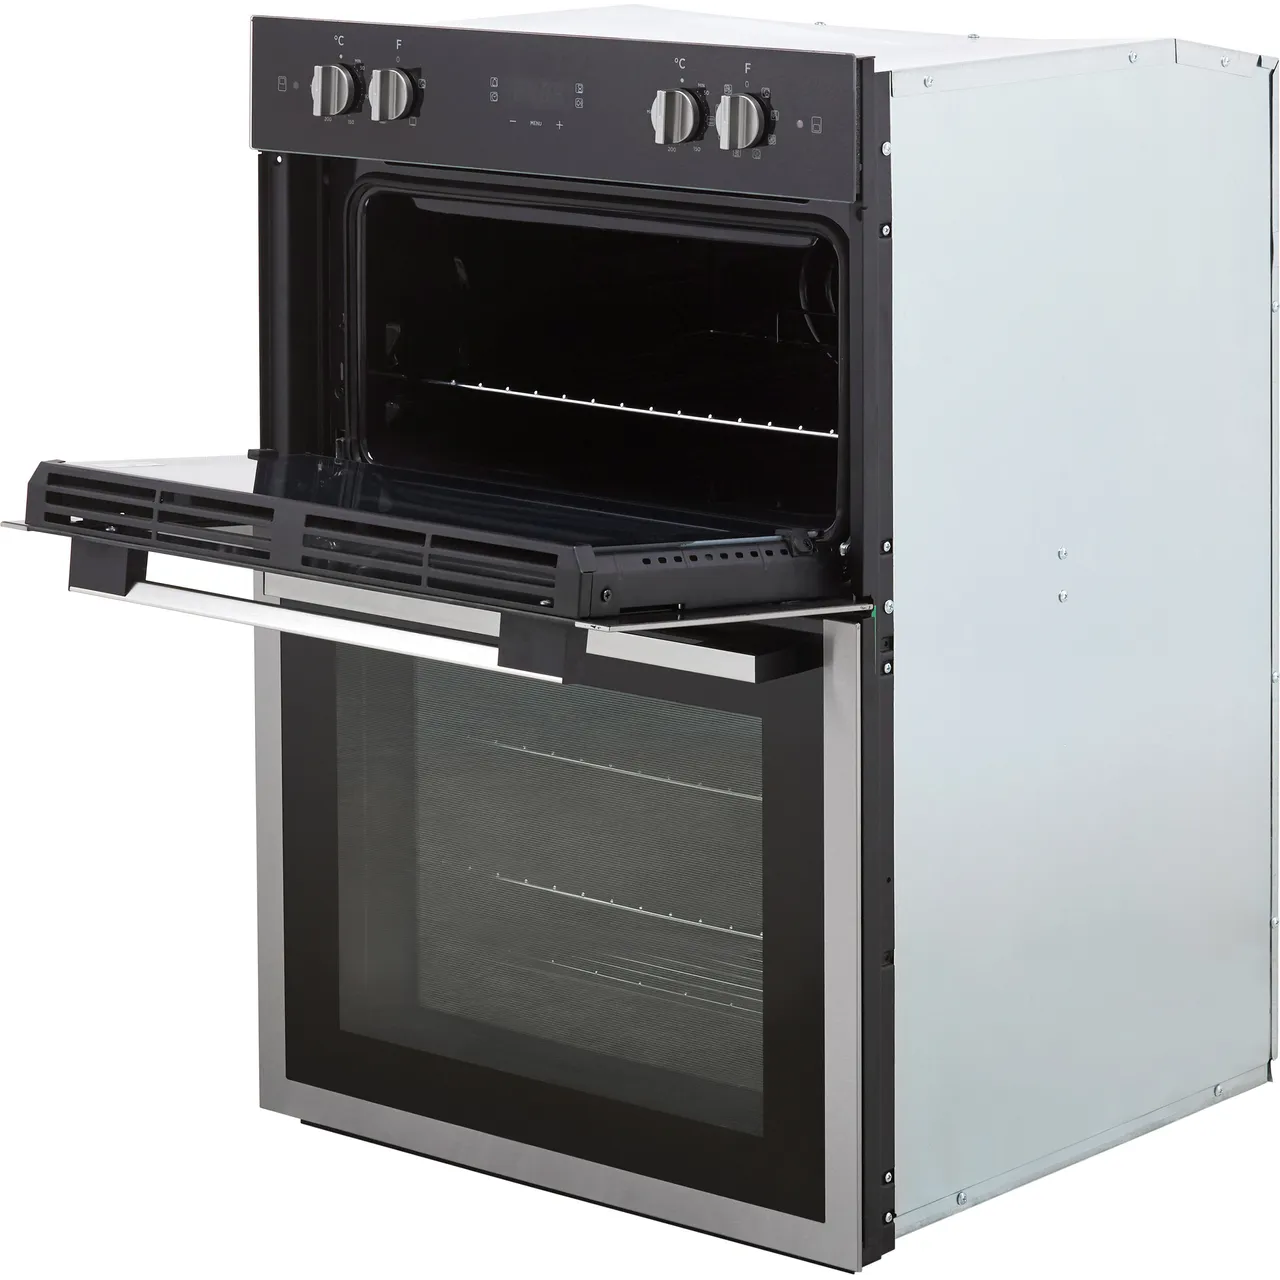 Hoover Double Oven Stainless Steel Built In Electric 65L/42L Black-HO9DC3UB308BI-8424